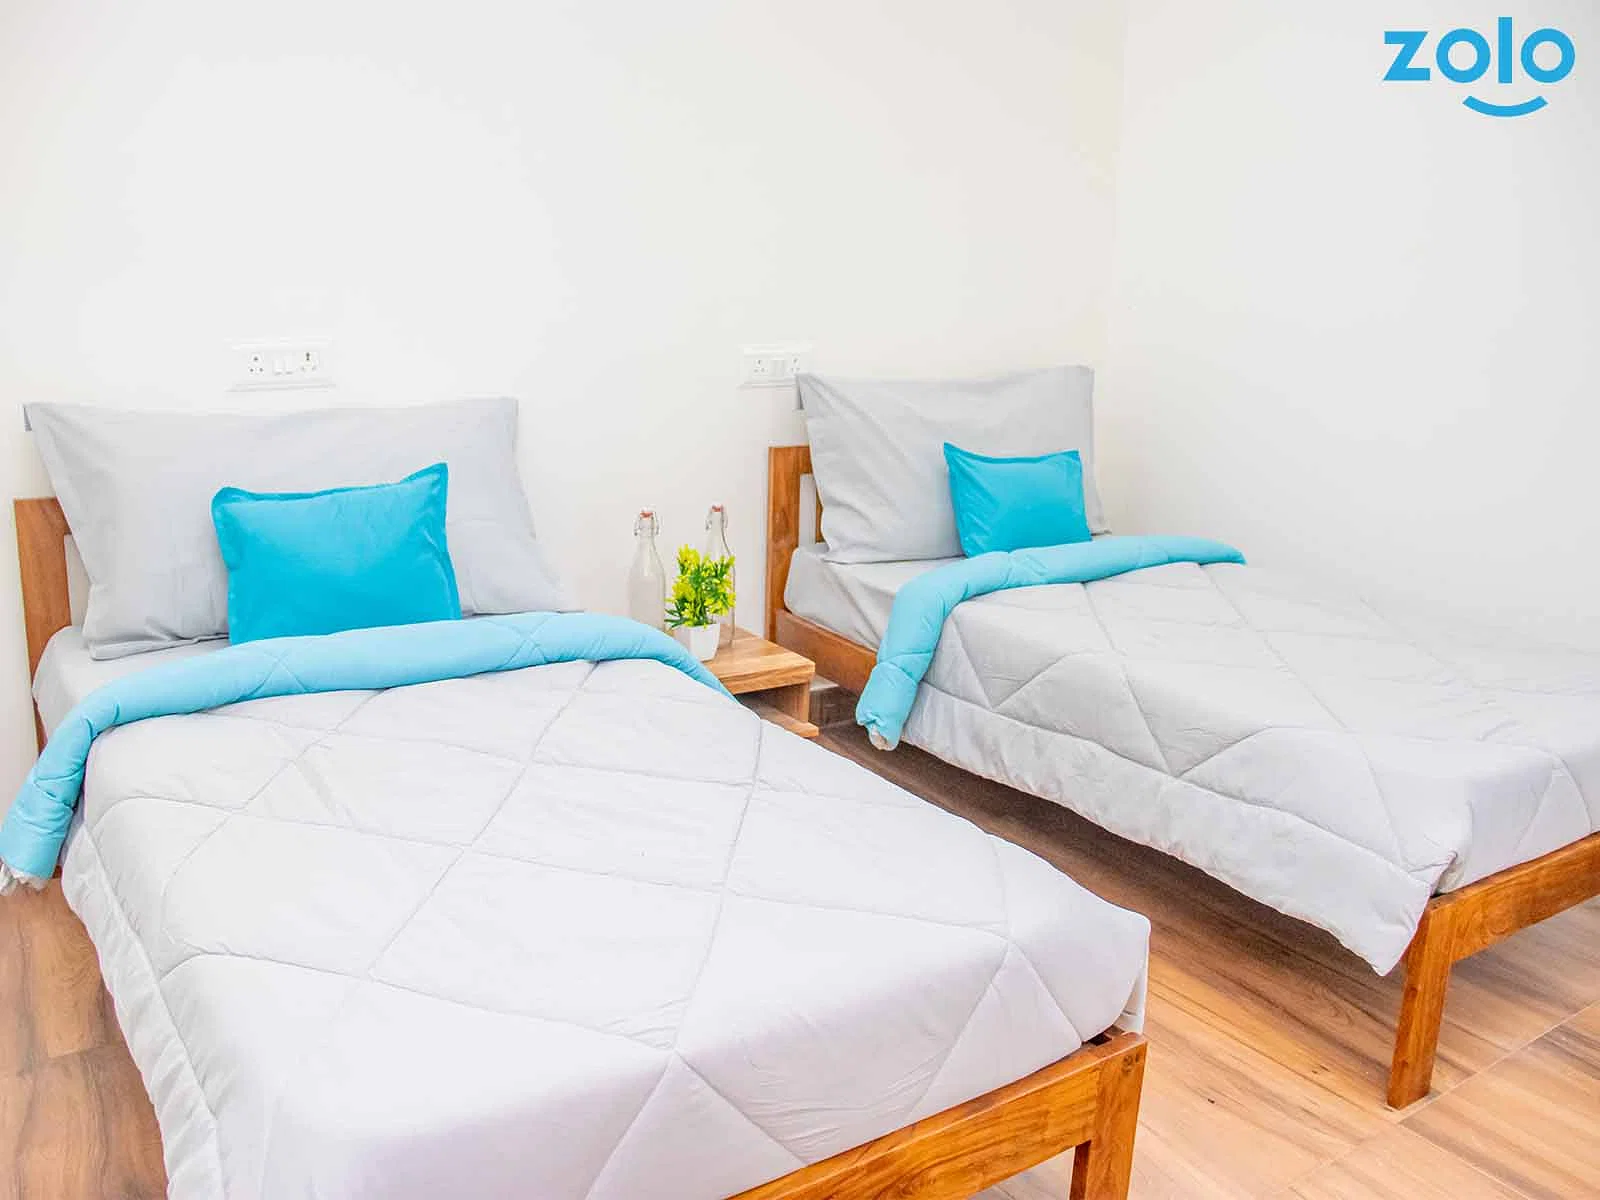 safe and affordable hostels for couple students with 24/7 security and CCTV surveillance-Zolo Akshala